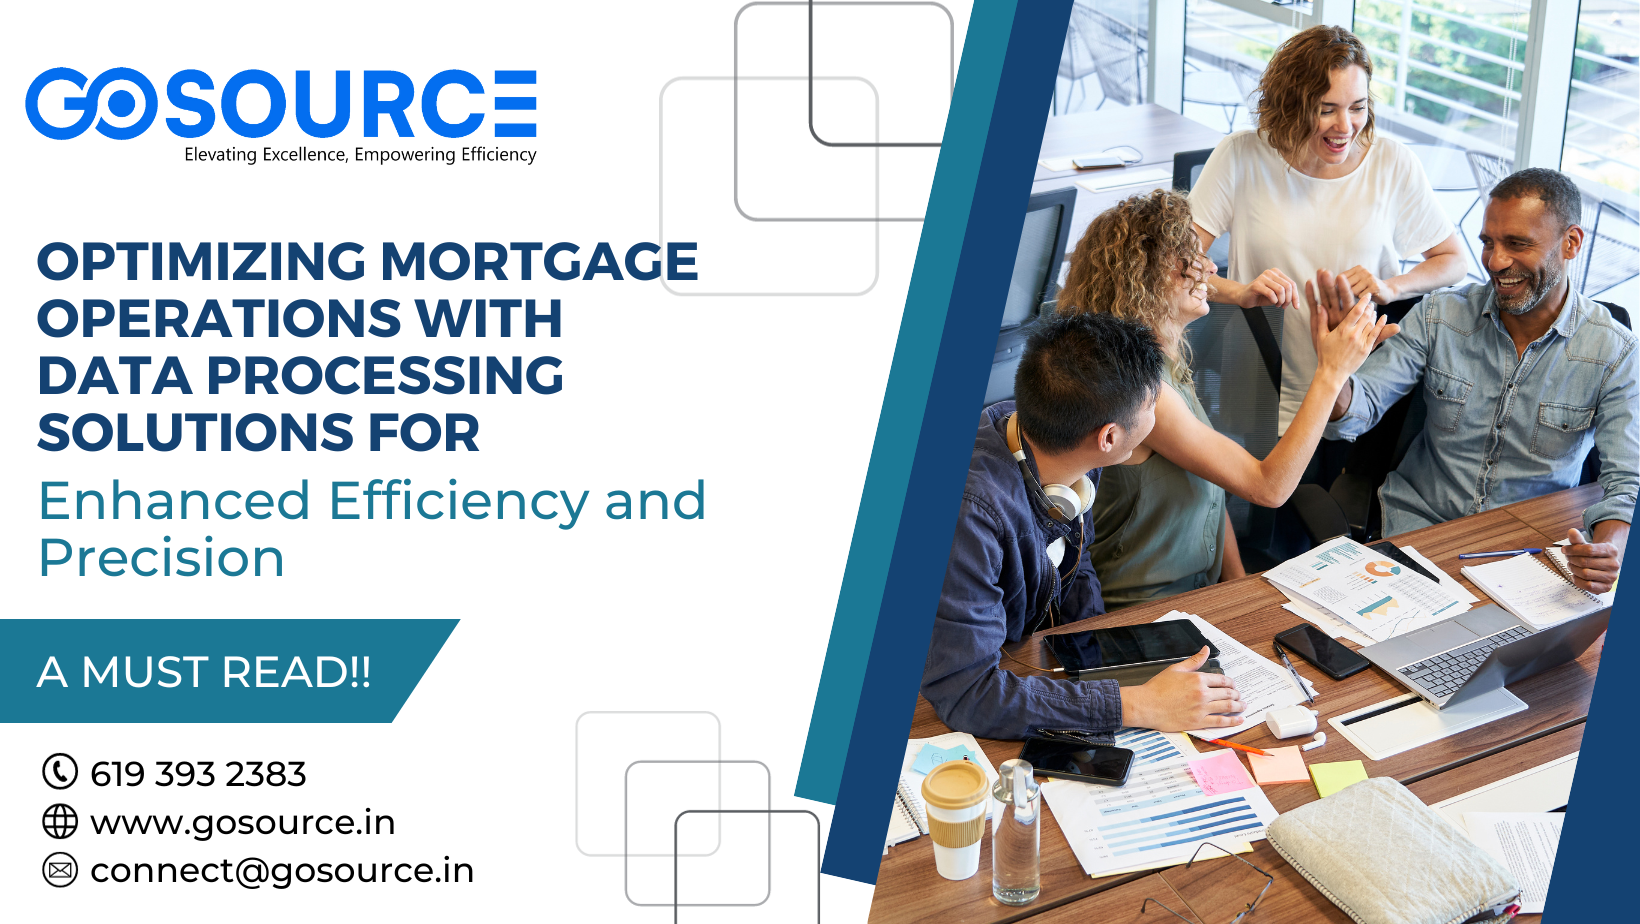 GoSource: Optimizing Mortgage Operations with Data Processing Solutions for Enhanced Efficiency and Precision